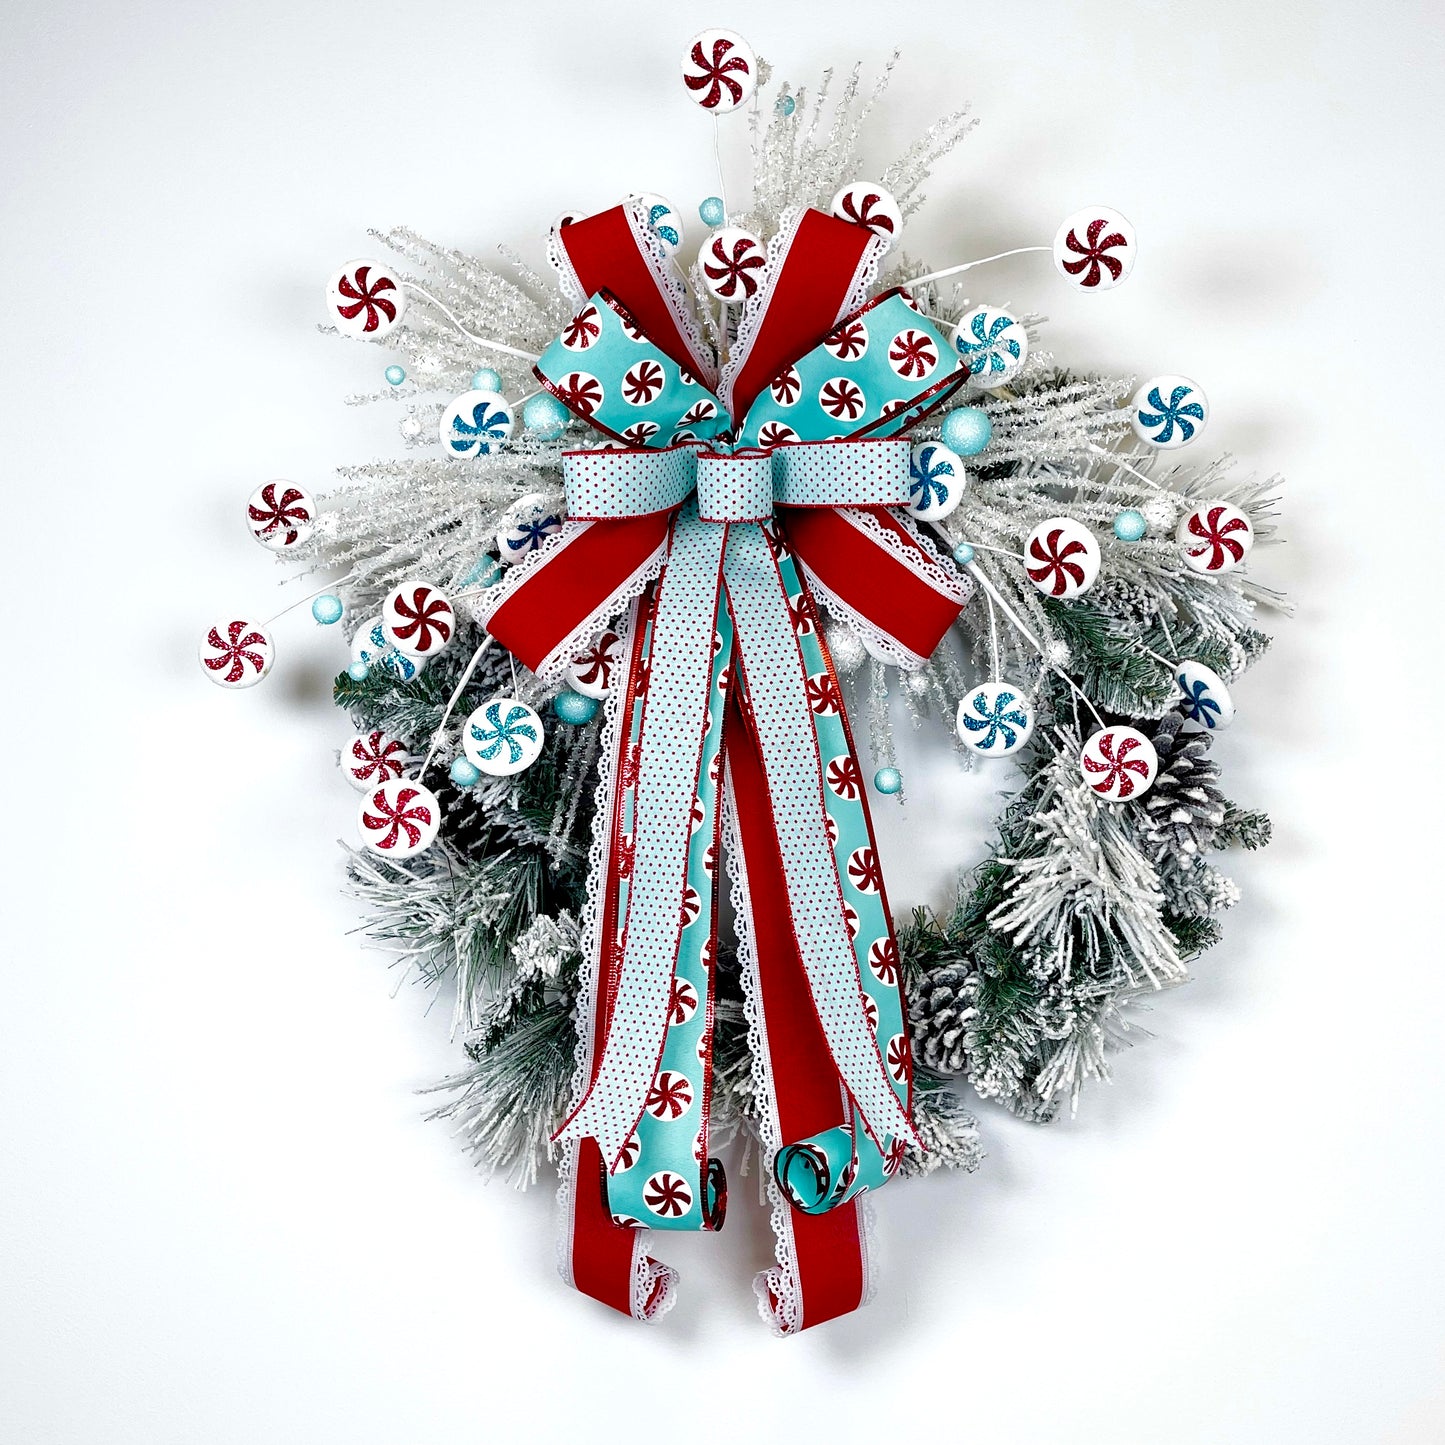 Whimsical Candy Wreath TUTORIAL